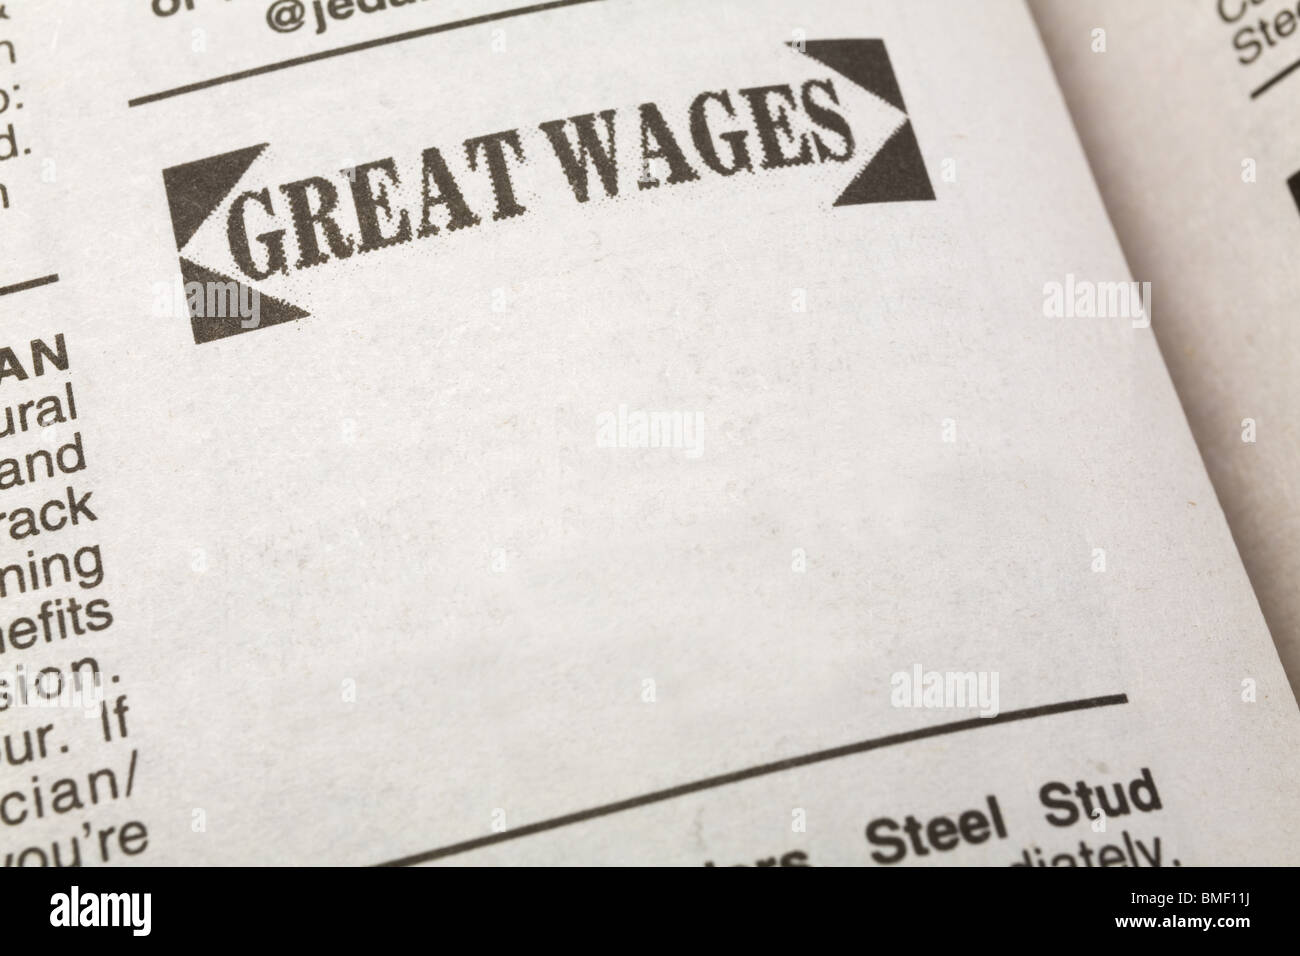 newspaper employment ad, Great Wages, Employment concept Stock Photo